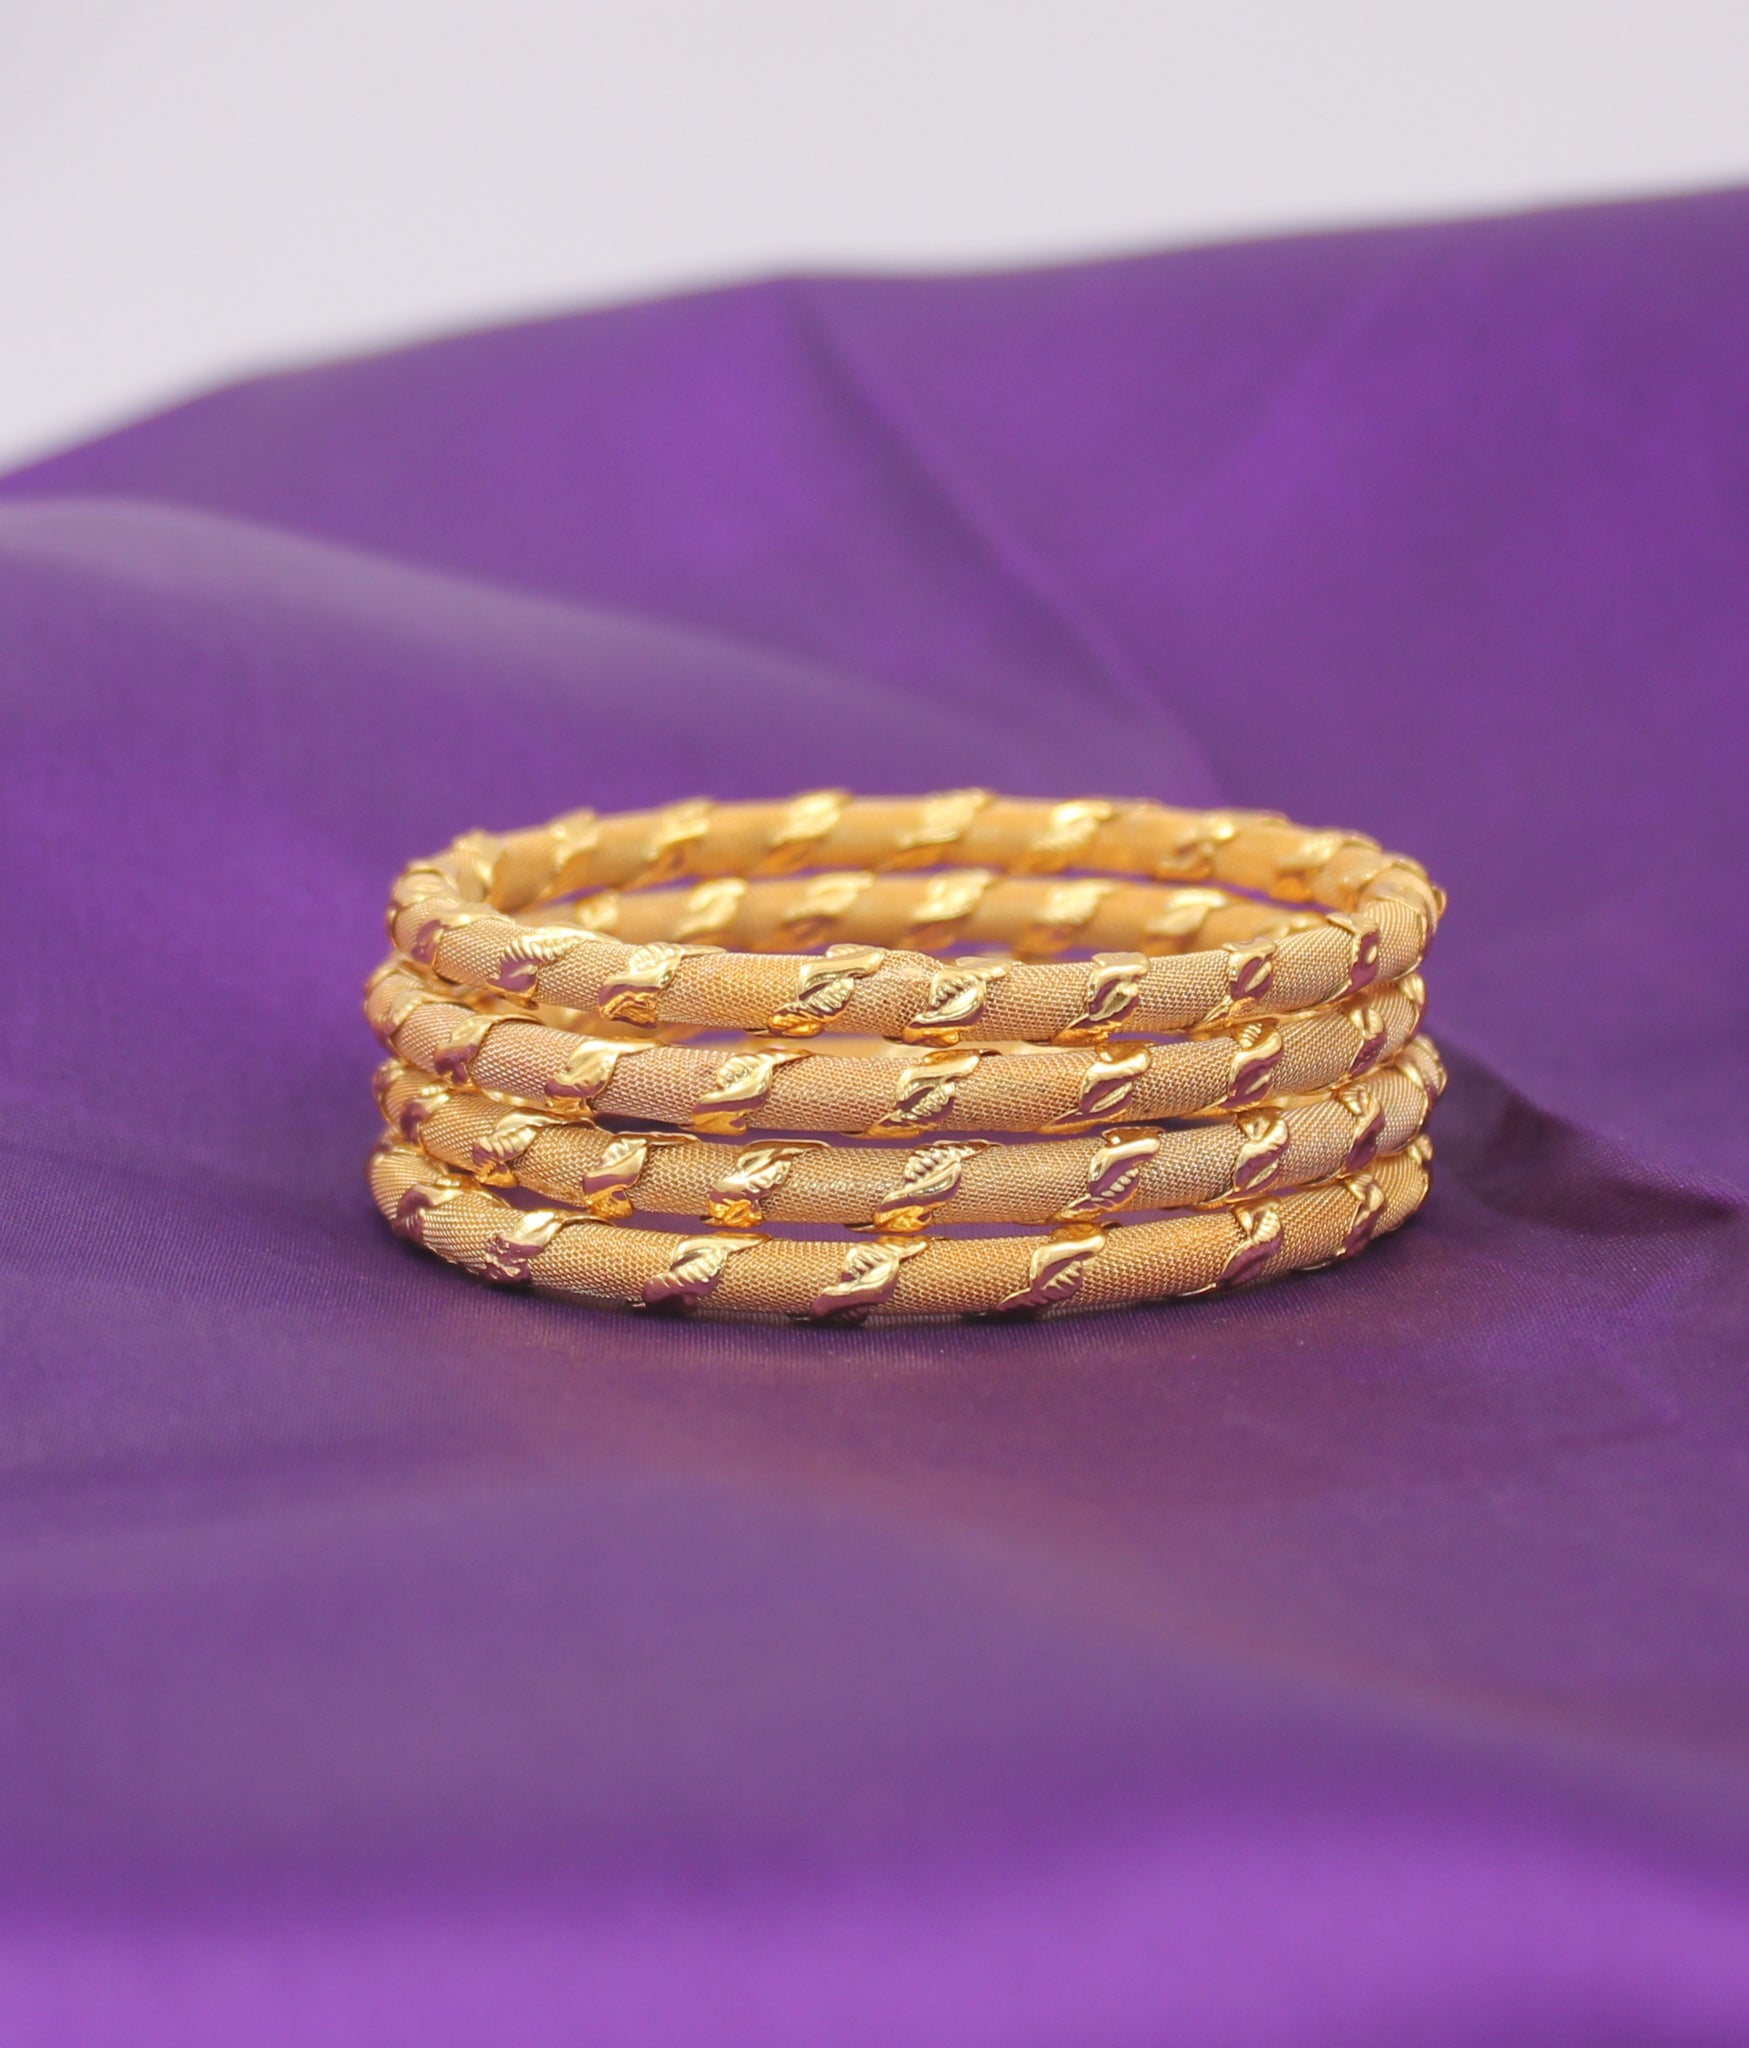 Simple 24k Gold Flower Inlaid Bangles 2022 For Women Ethiopian, African,  And Dubai Bracelets For Bridal Party And Wedding Jewelry Q0717 From  Sihuai05, $4.29 | DHgate.Com